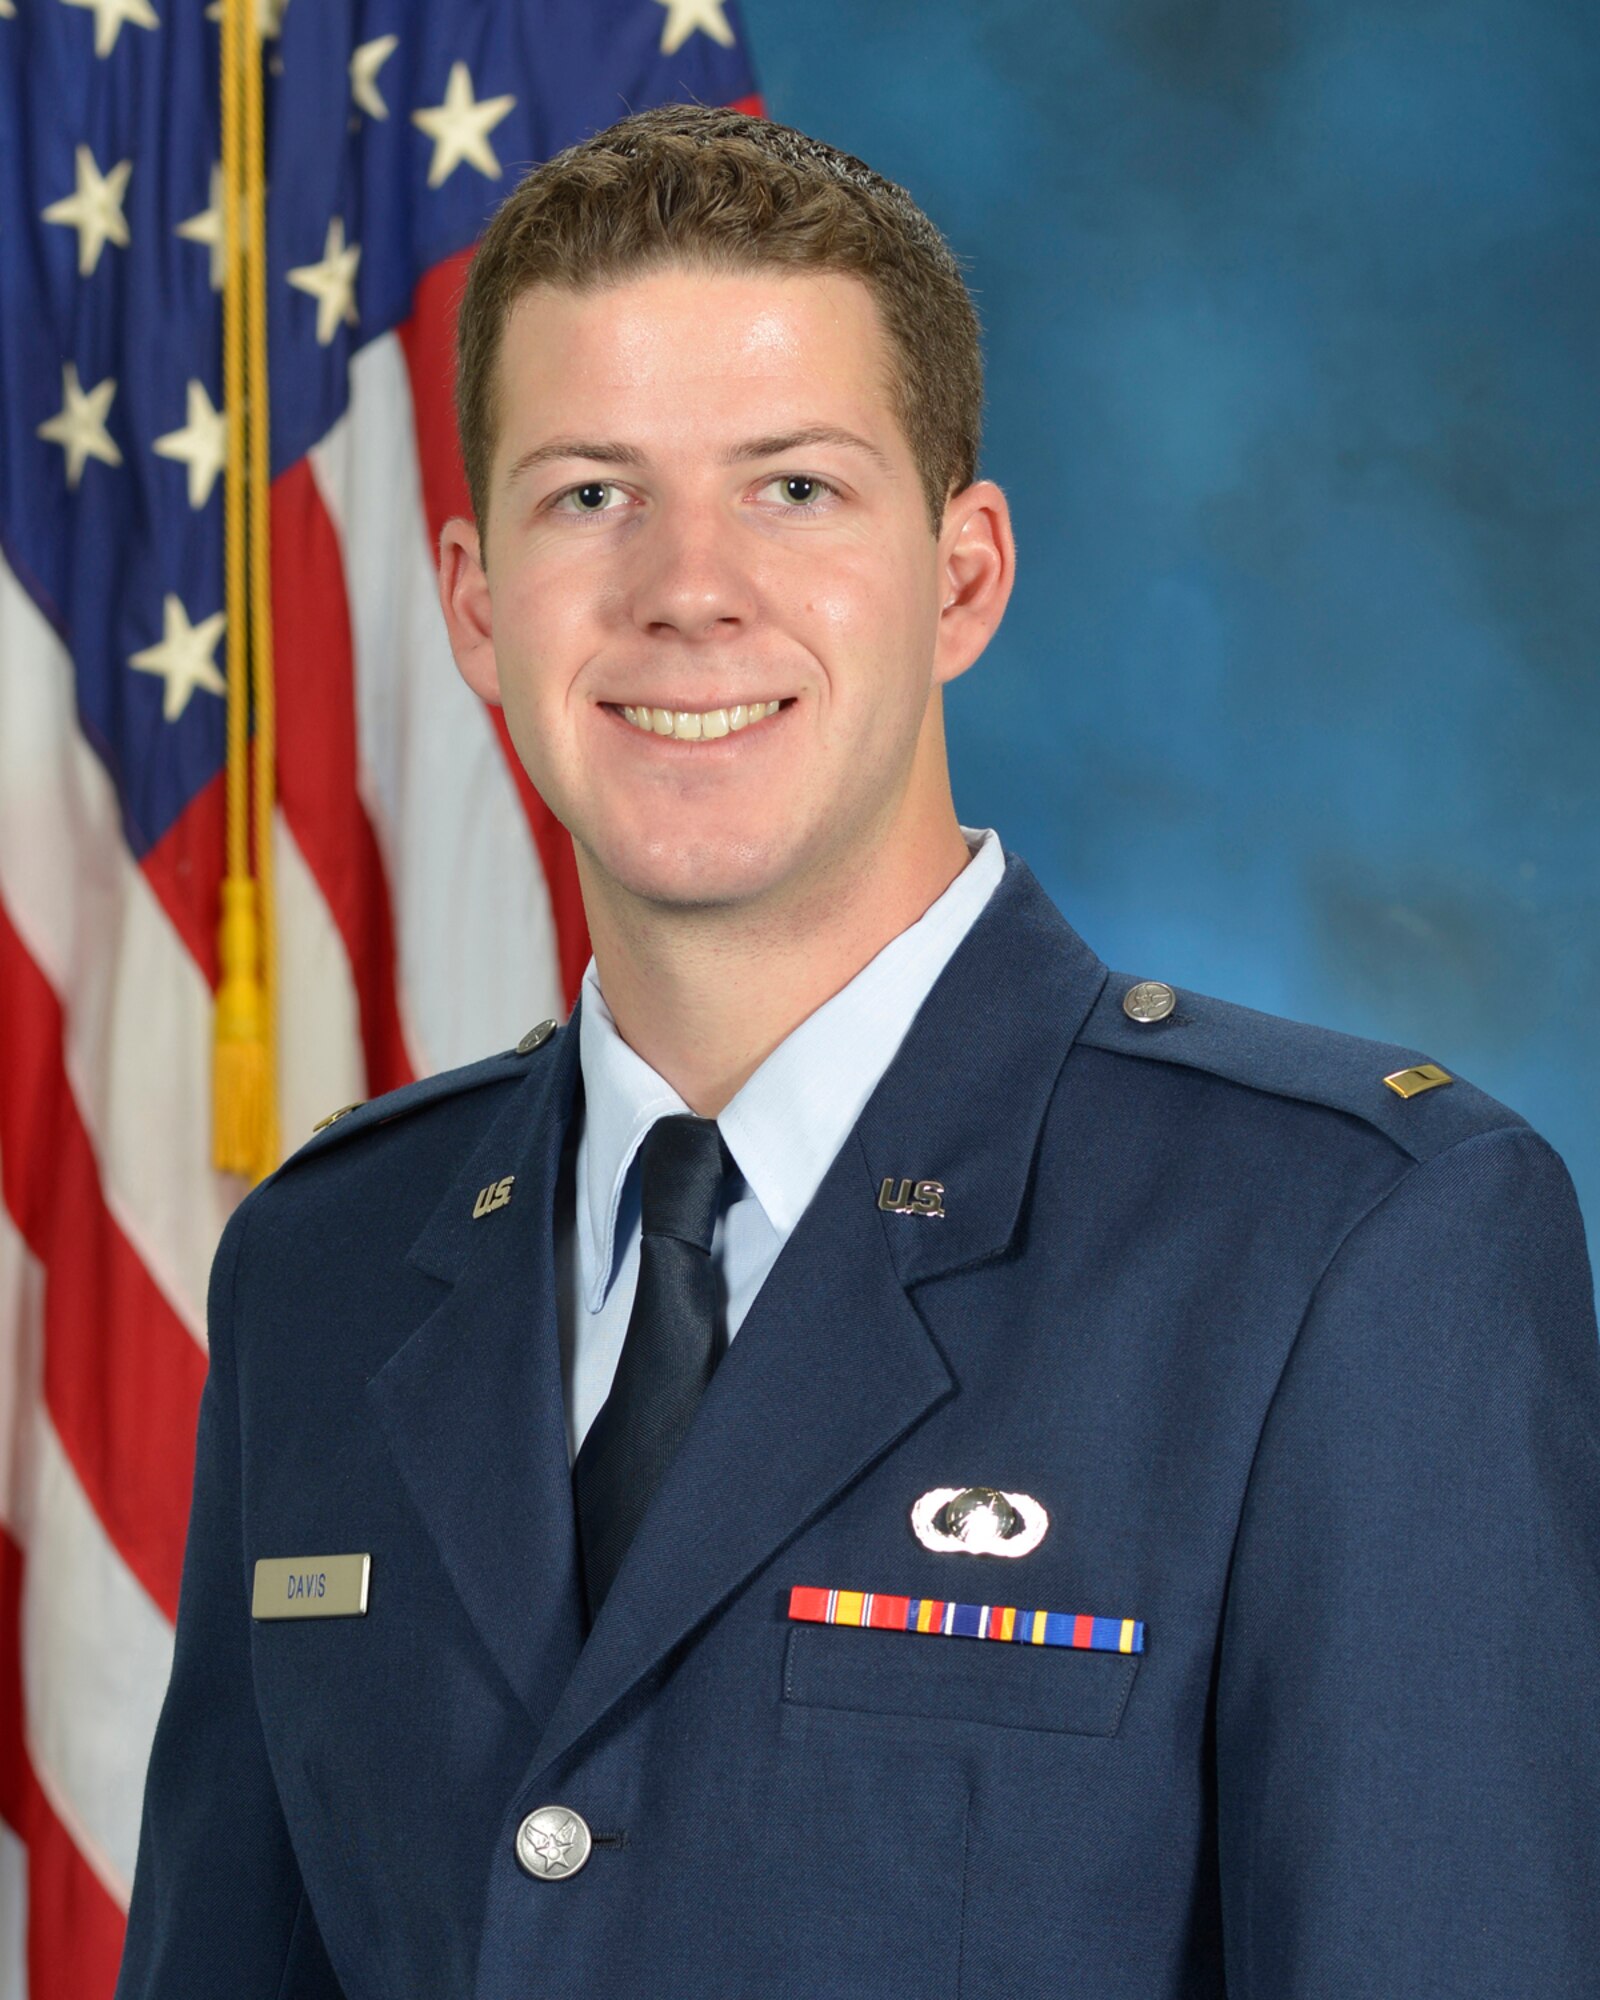 Second Lt. Benjamin T. Davis, a program manager on the Three-Dimensional Expeditionary Long-Range Radar team, received the Distinguished Young Armed Forces Communications and Electronics Association Chapter Award. (U.S. Air Force photo by Linda LaBonte Britt)